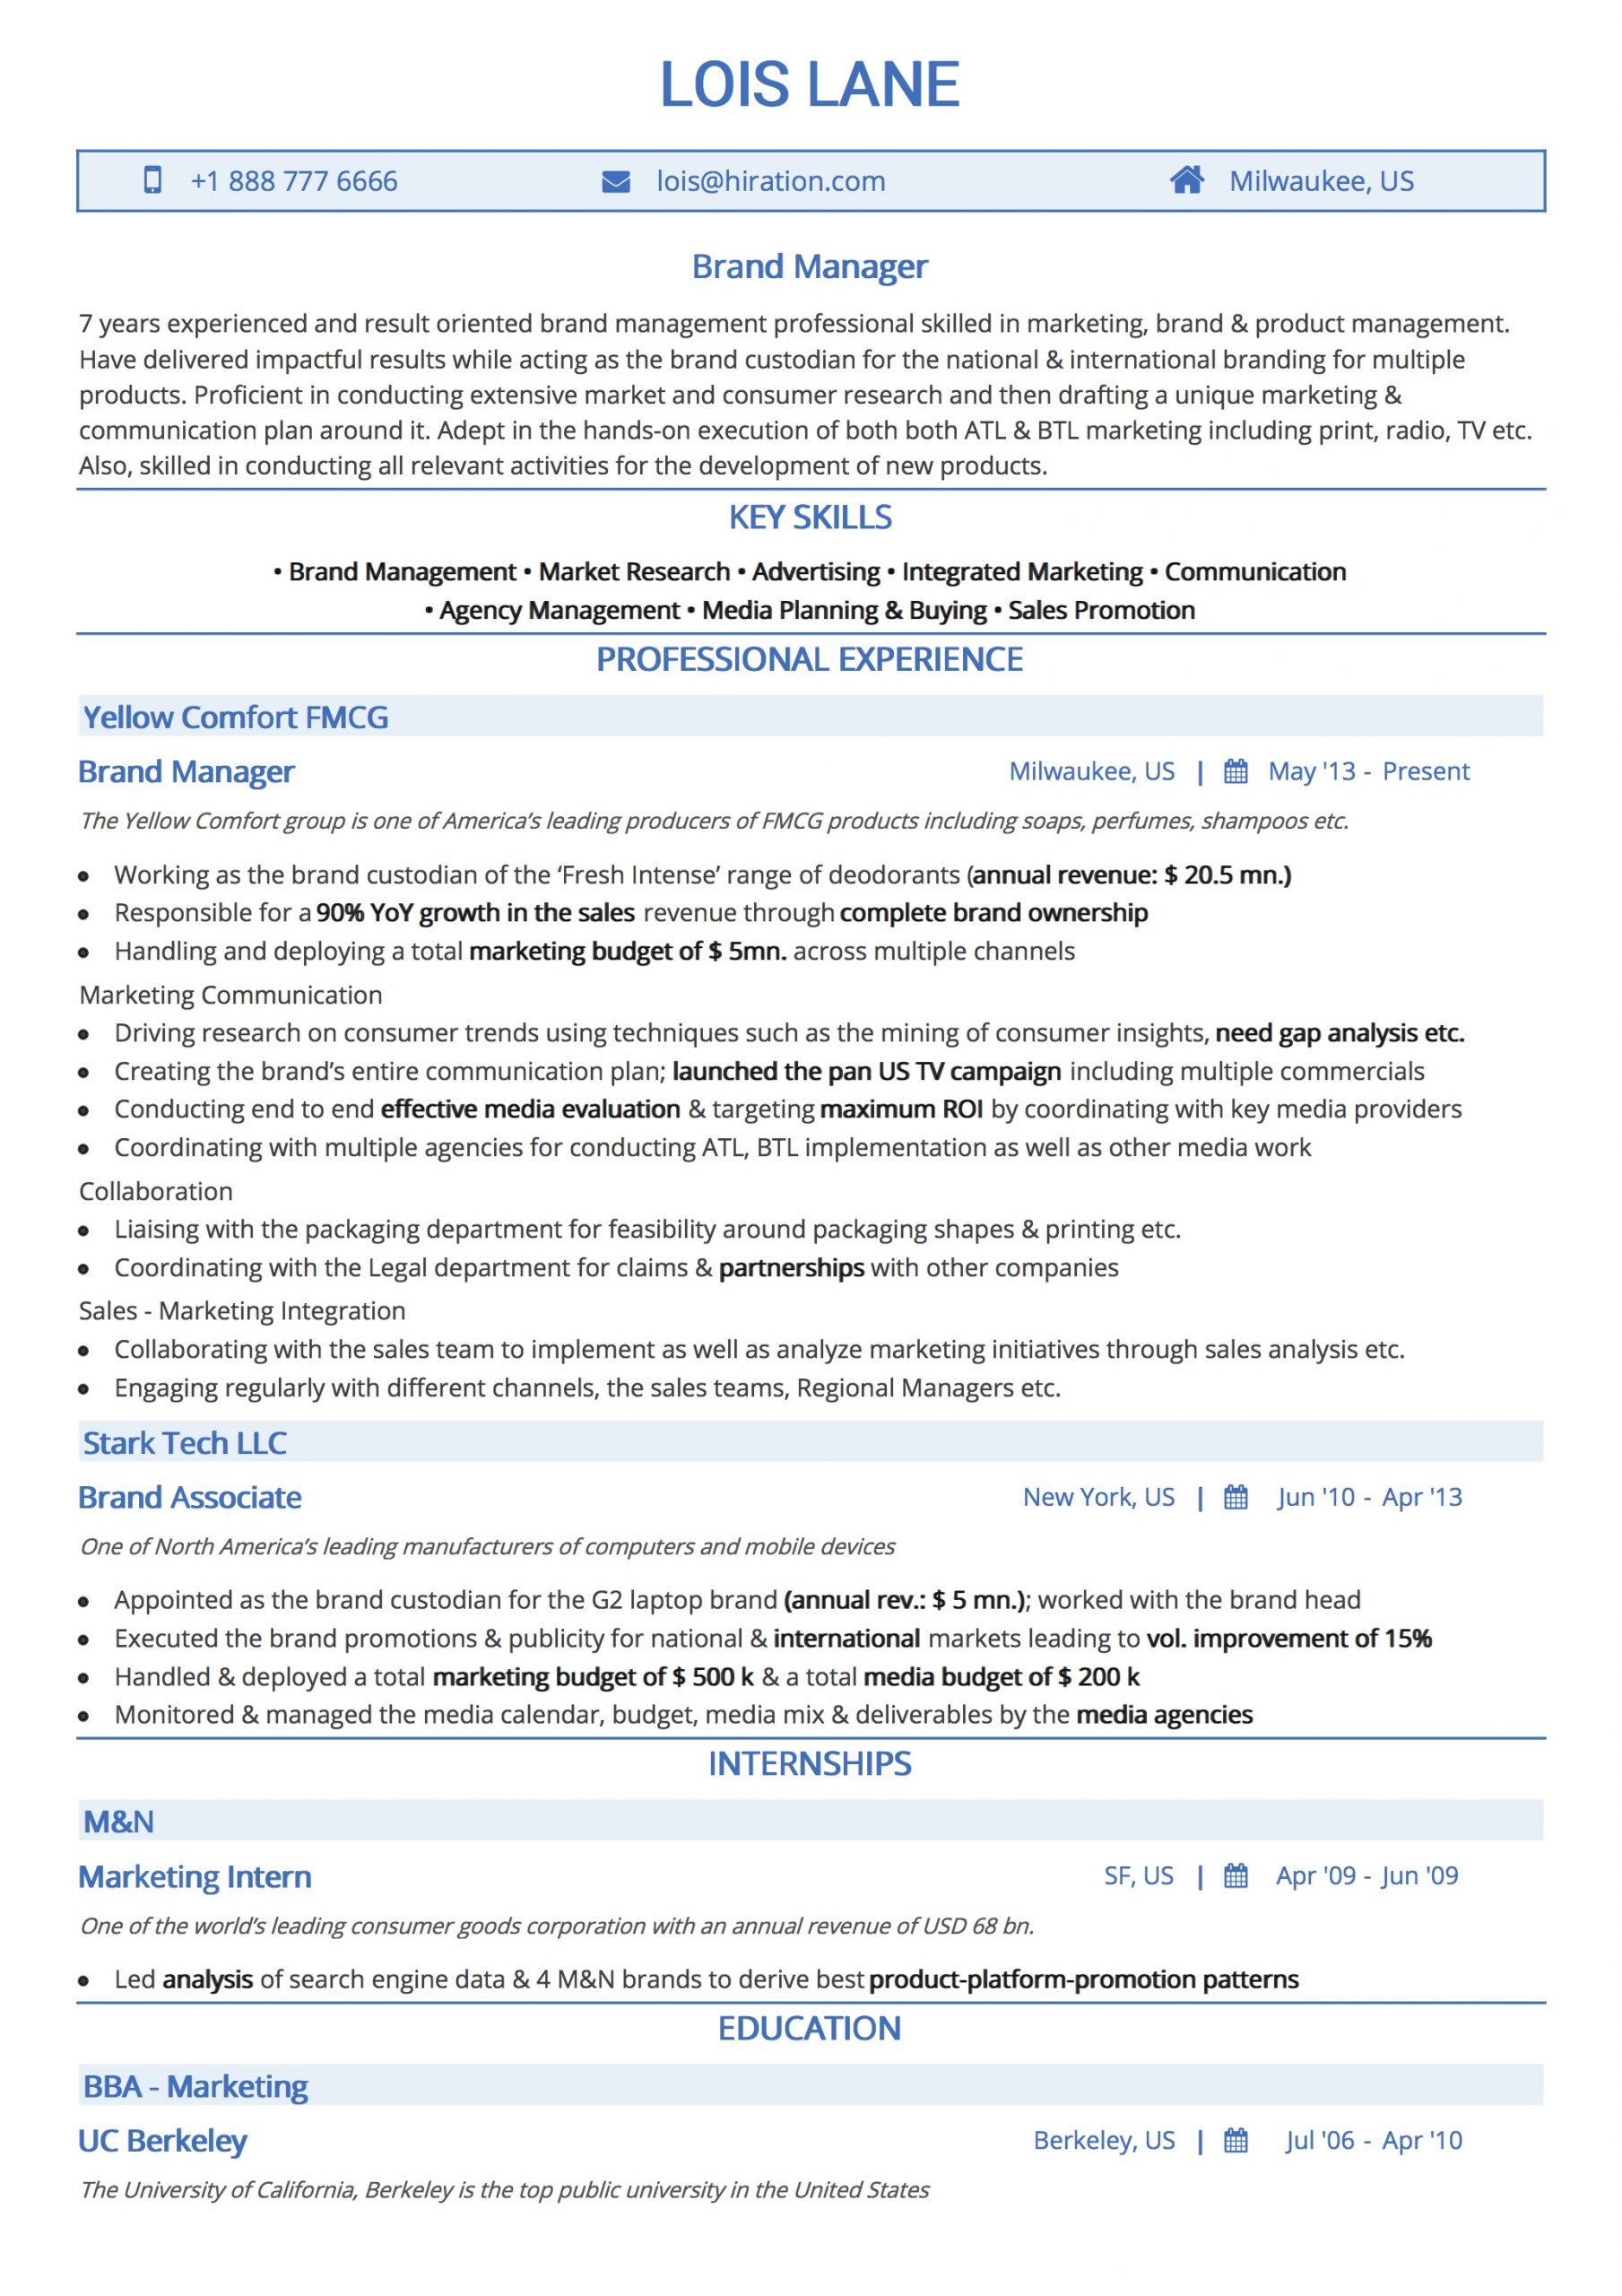 Simple Resume Template: The 2020 List of 7 Simple Resume Templates